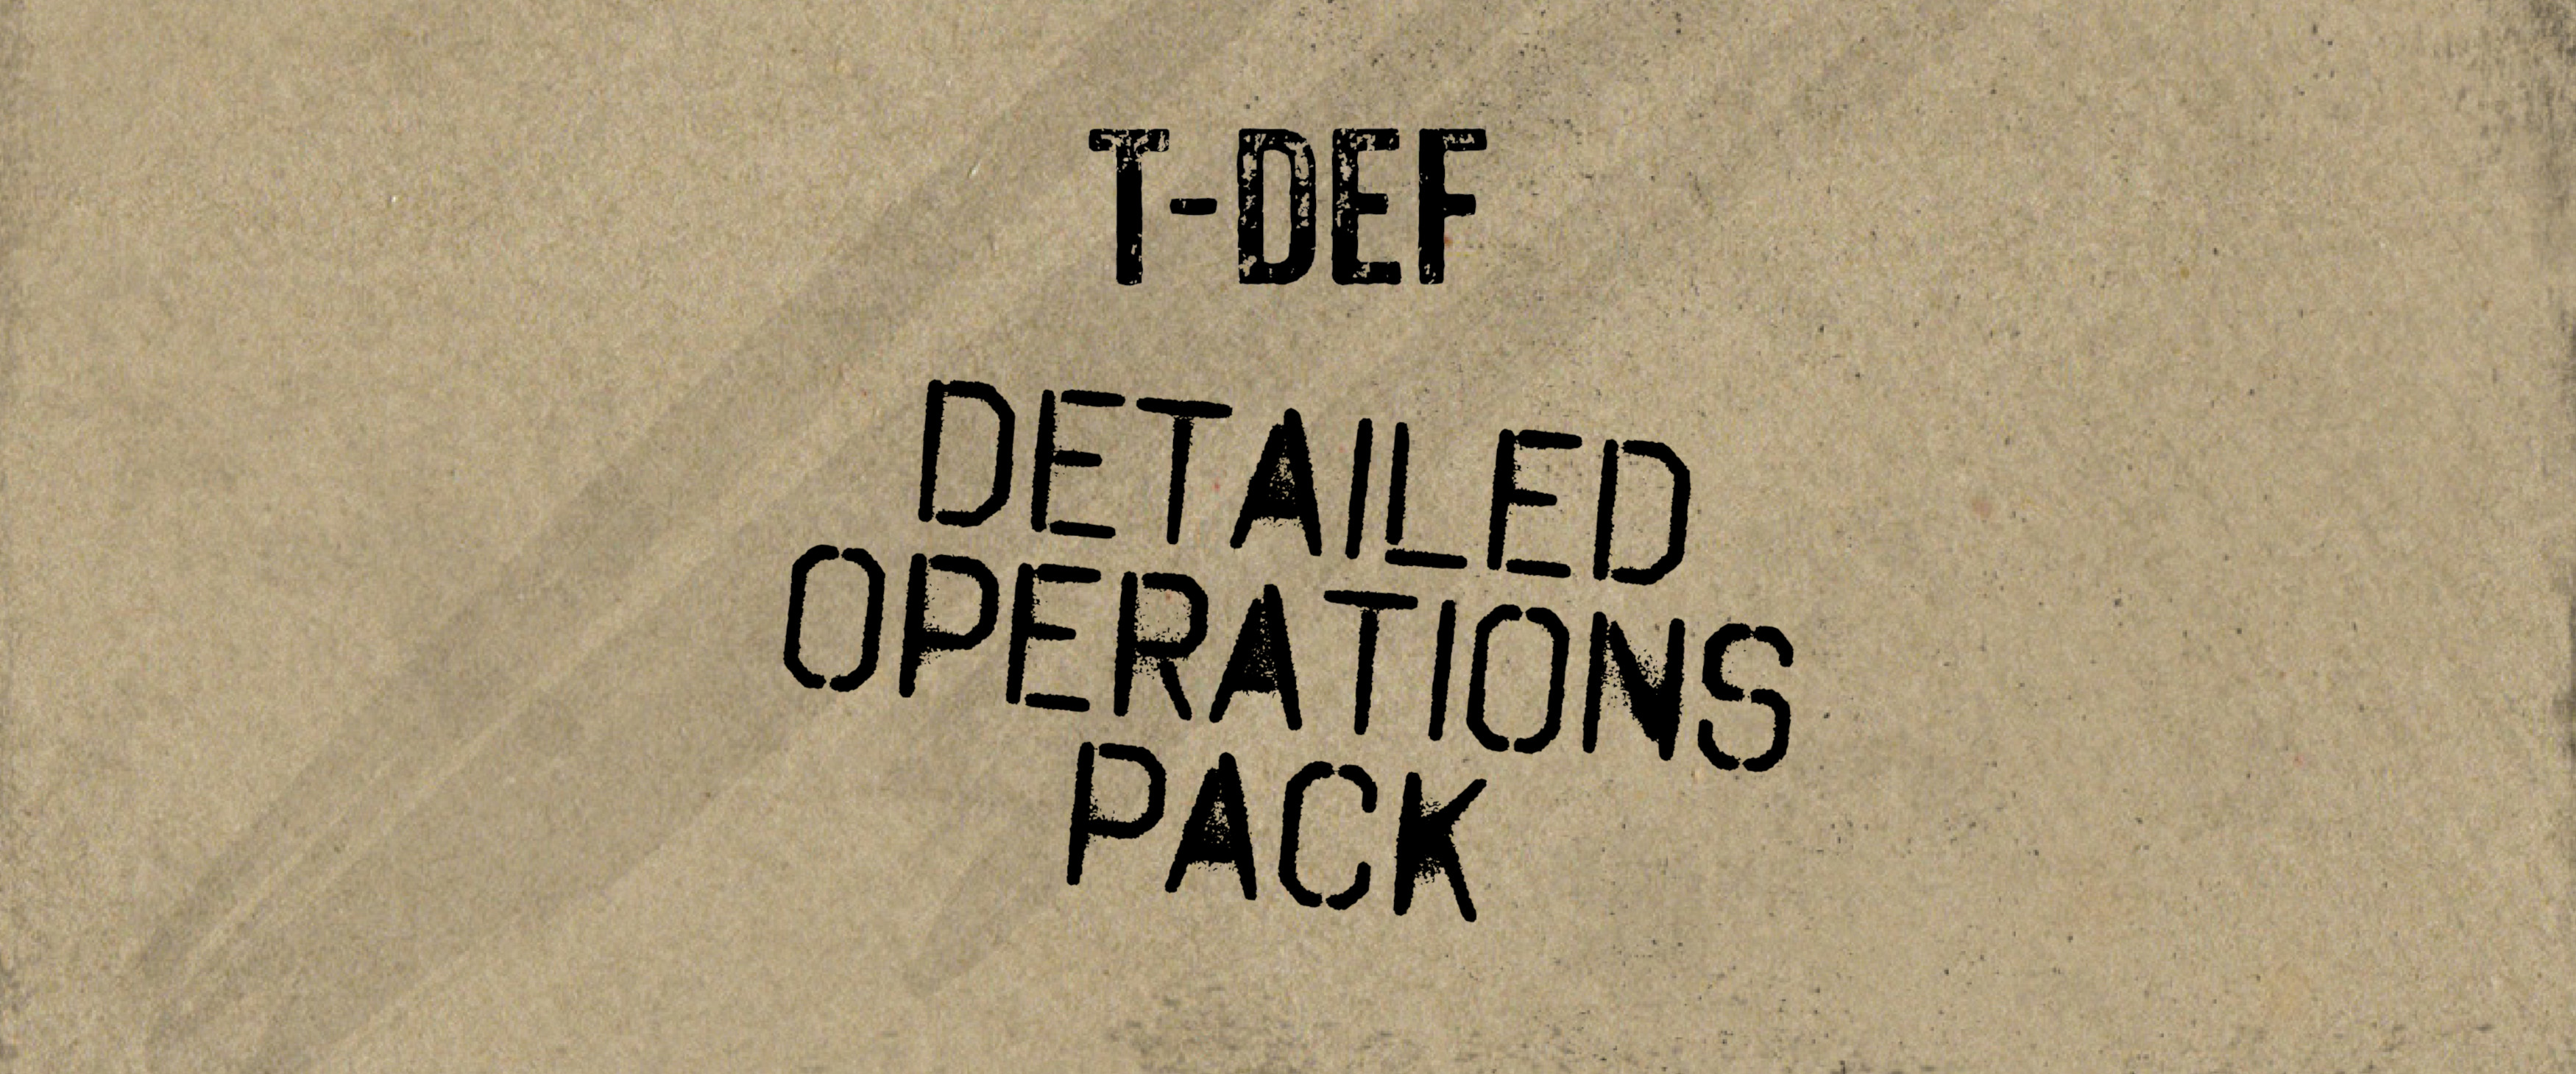 T-DEF Detailed Operations Pack